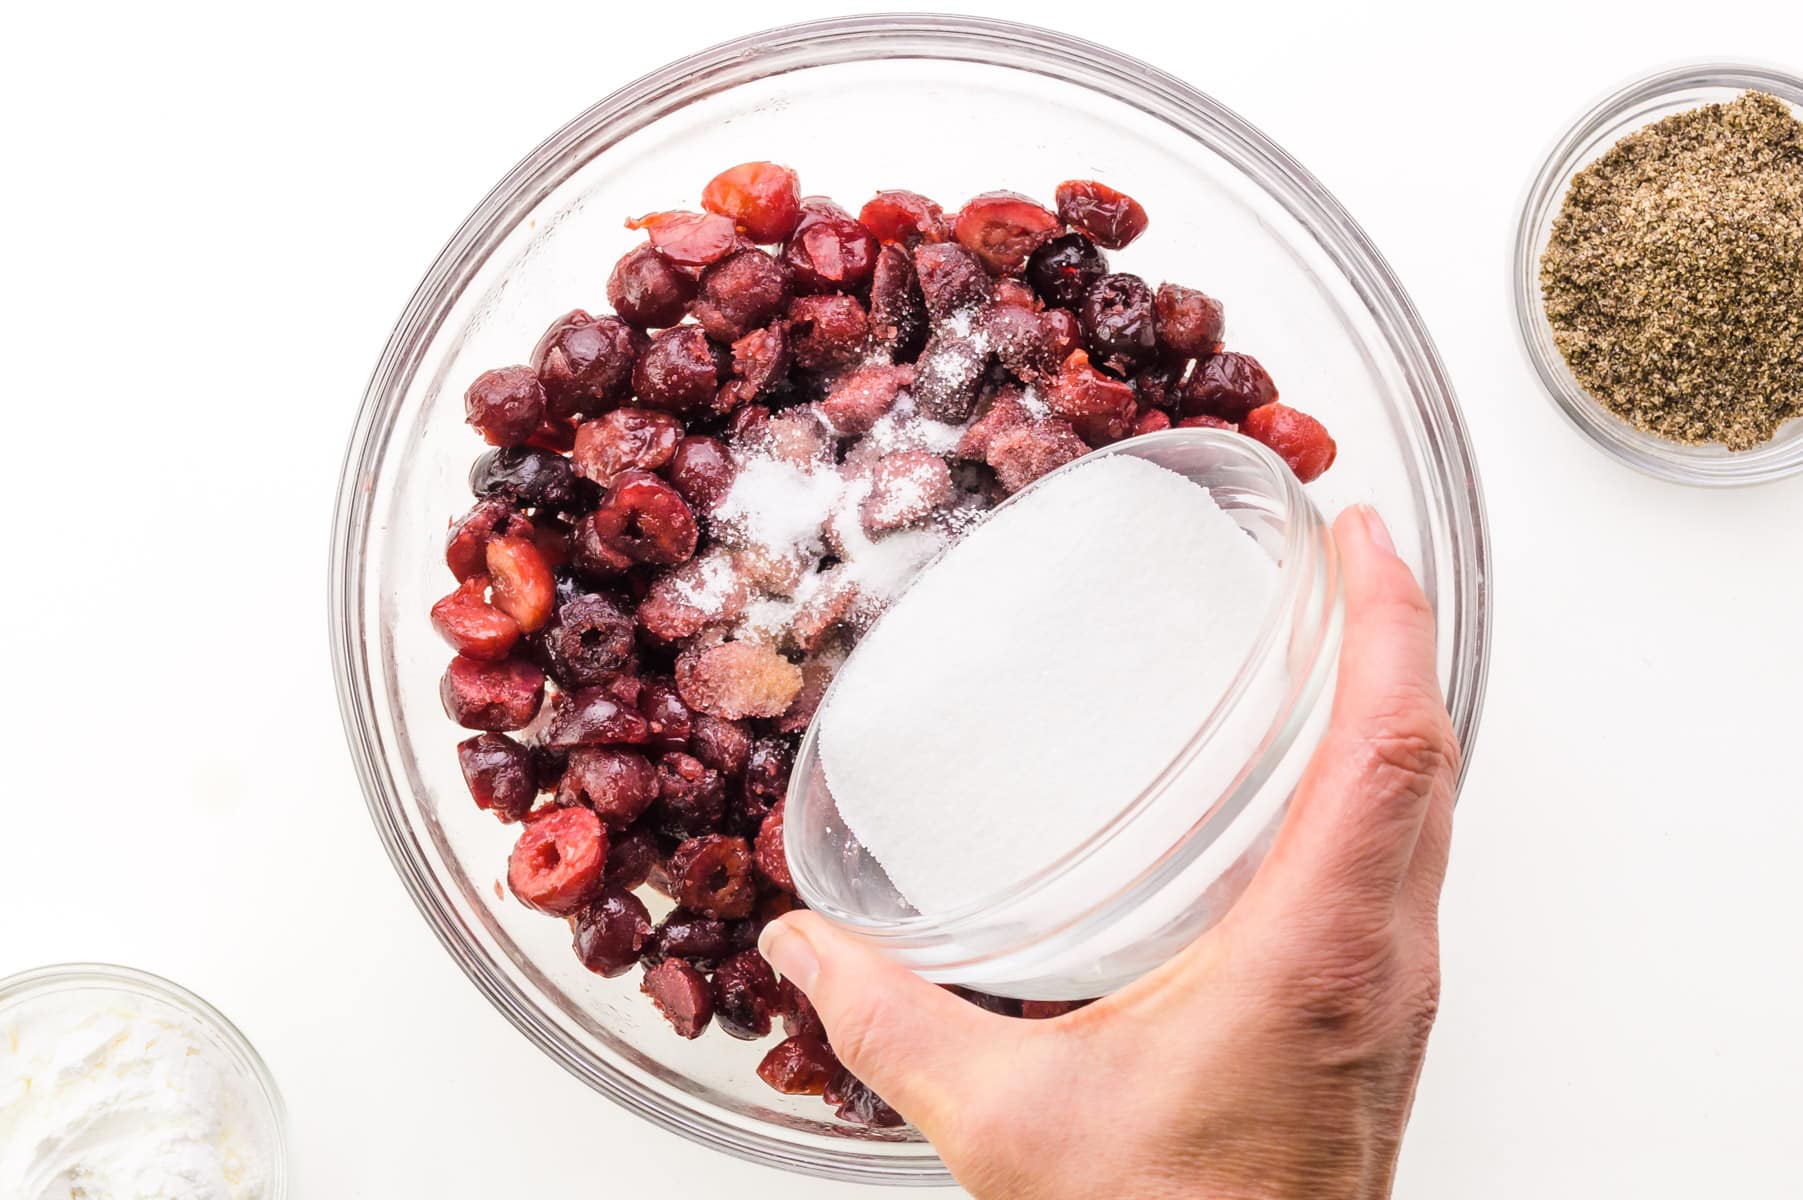 A hand holds a bowl of sugar, pouring it into a bowl of cherries. There is a bowl of ground flax seed nearby.